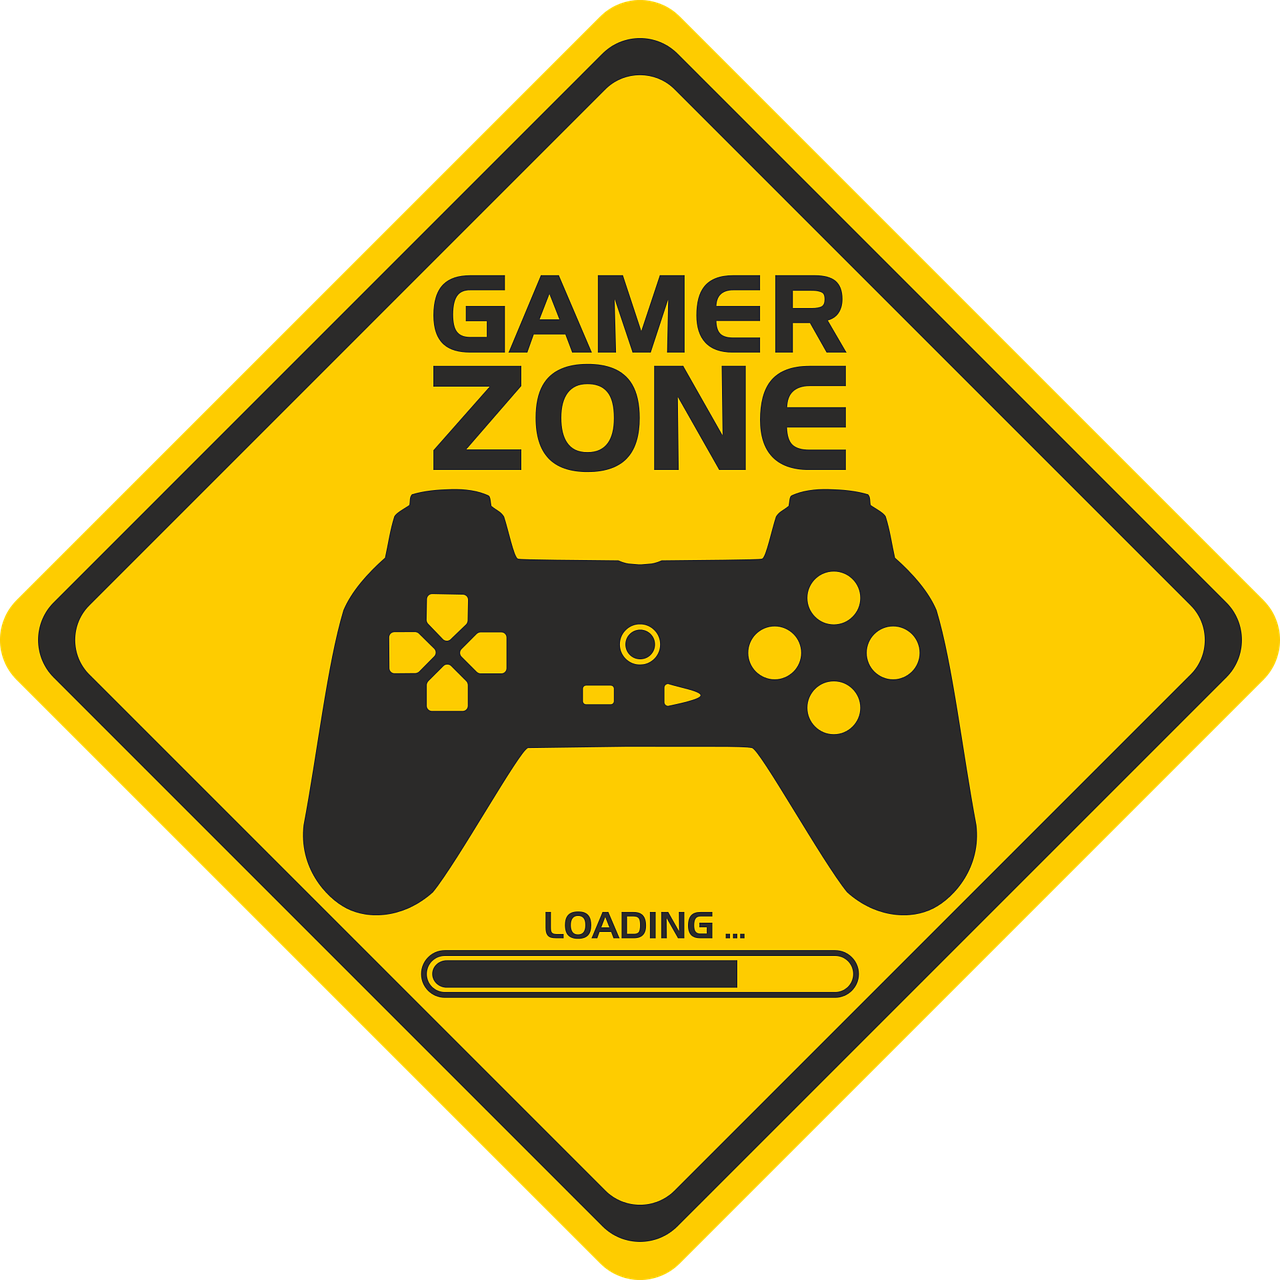 Video Game Industry - A yellow caution sign with a game controller and a loading sign.